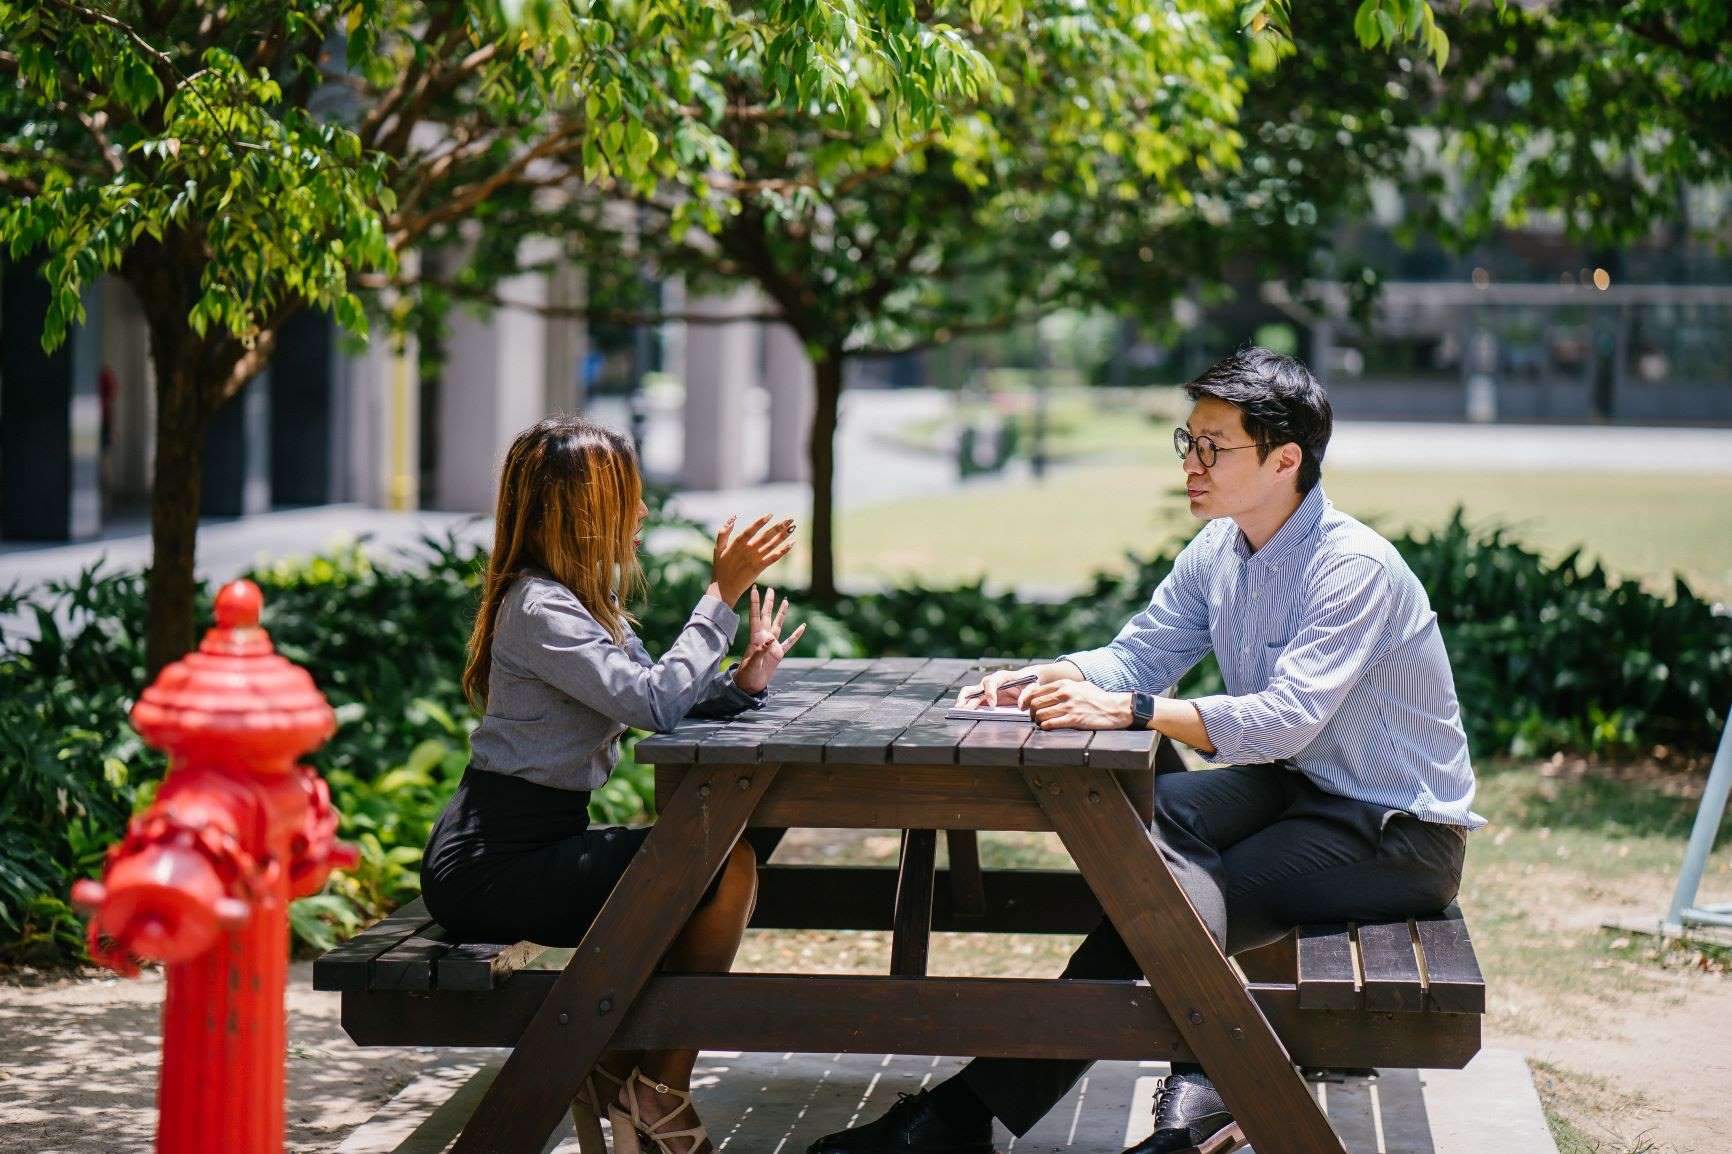 A woman and man sitting at an outdoor table, deep in conversation